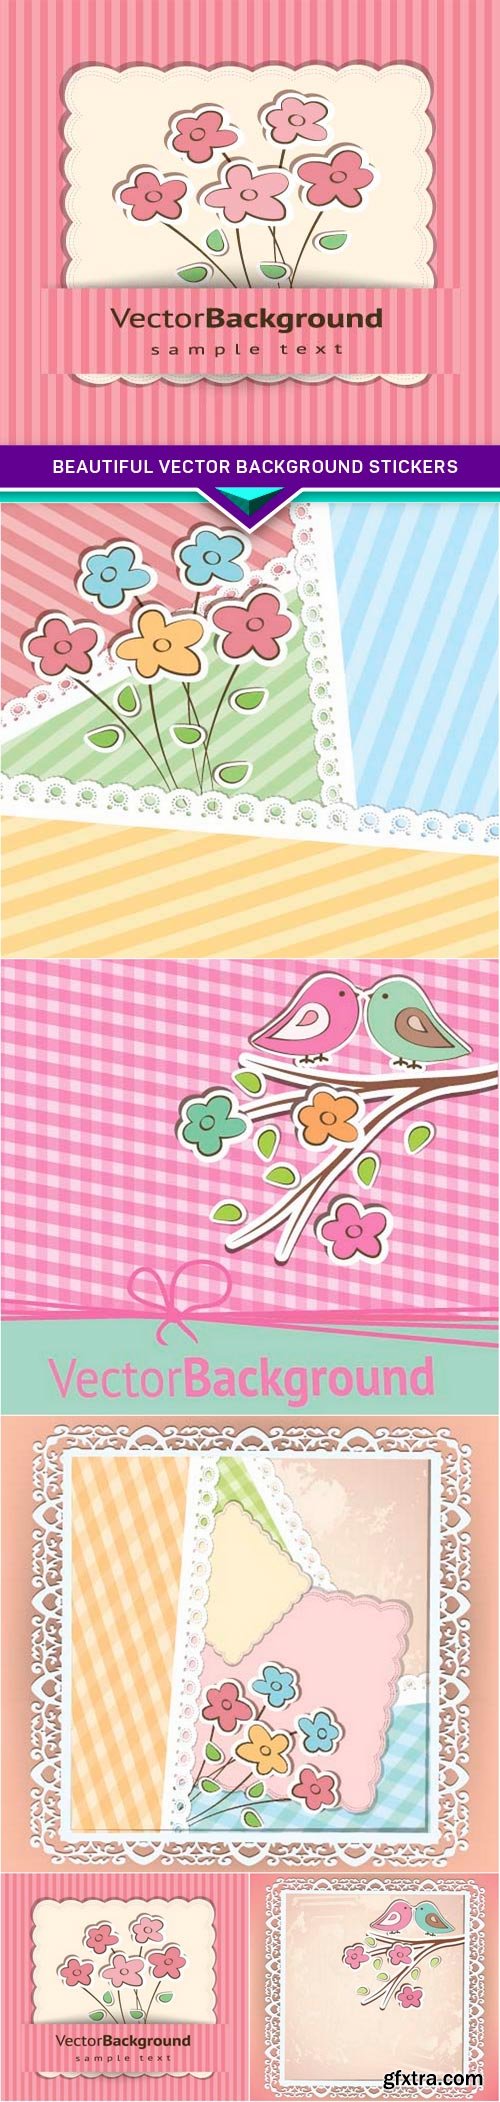 Beautiful vector background stickers 5x EPS